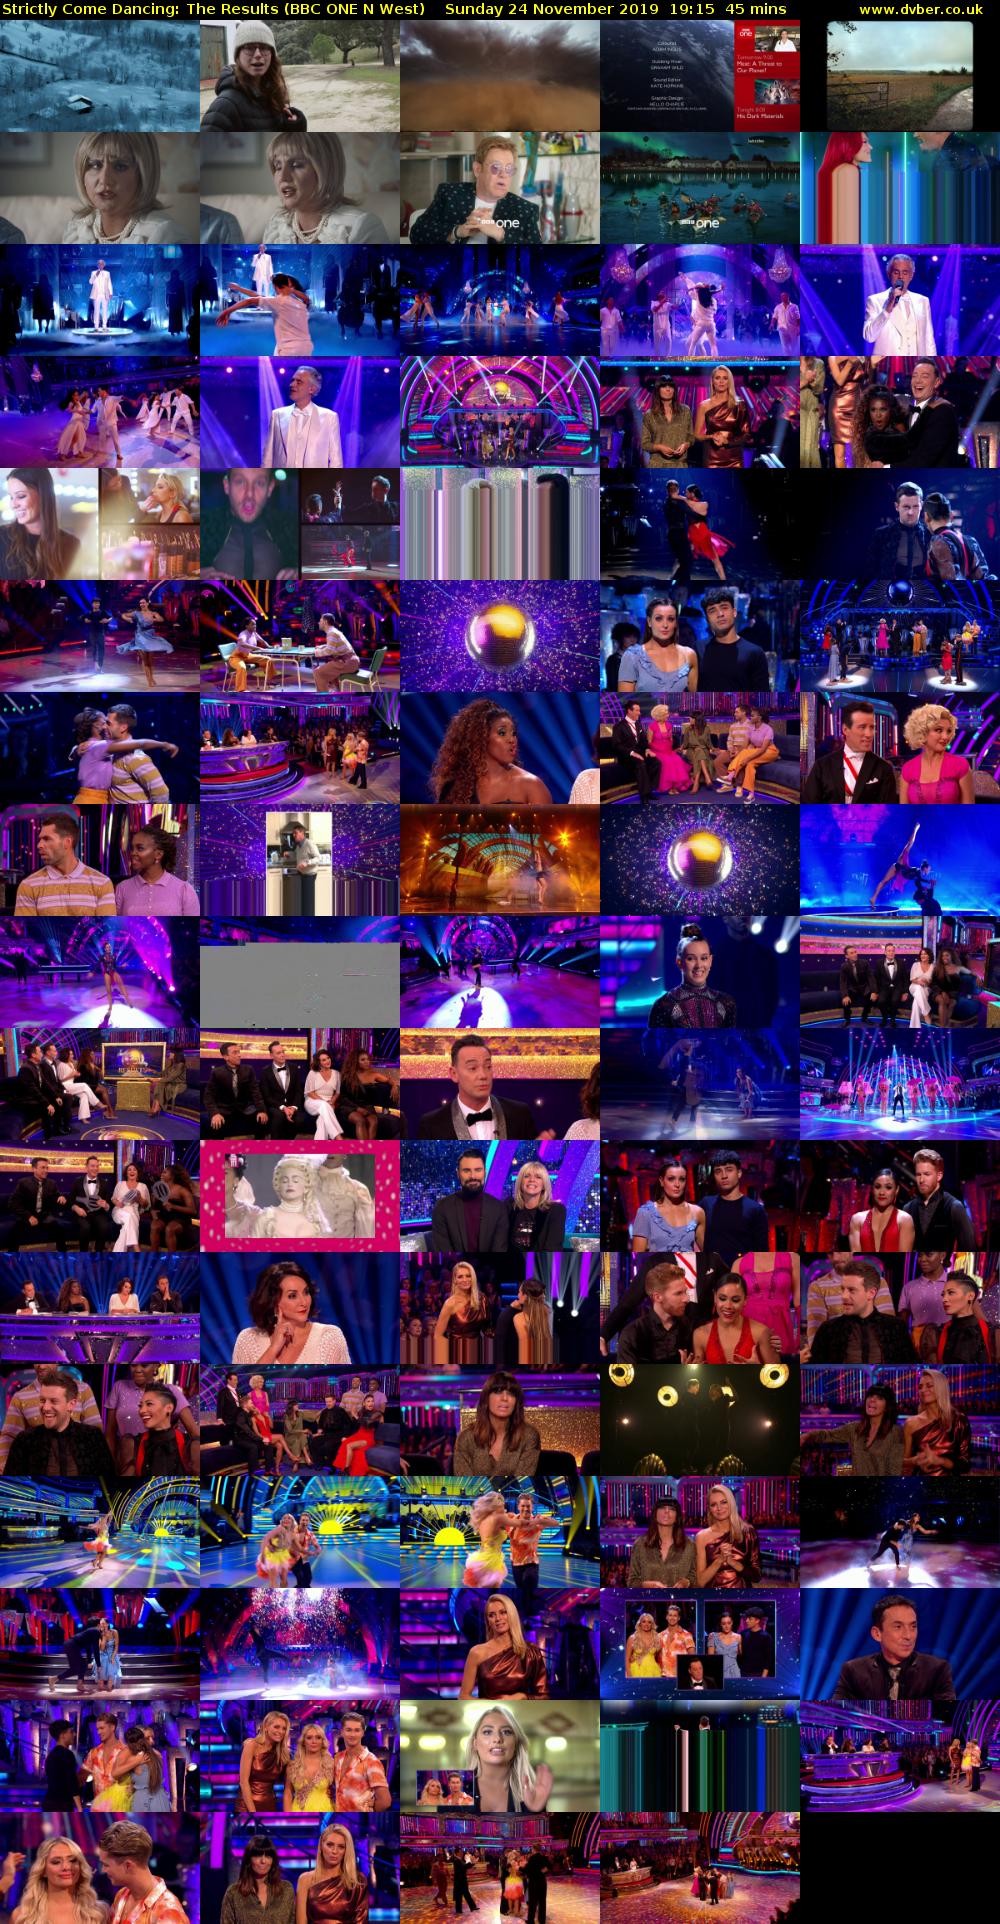 Strictly Come Dancing: The Results (BBC ONE N West) Sunday 24 November 2019 19:15 - 20:00